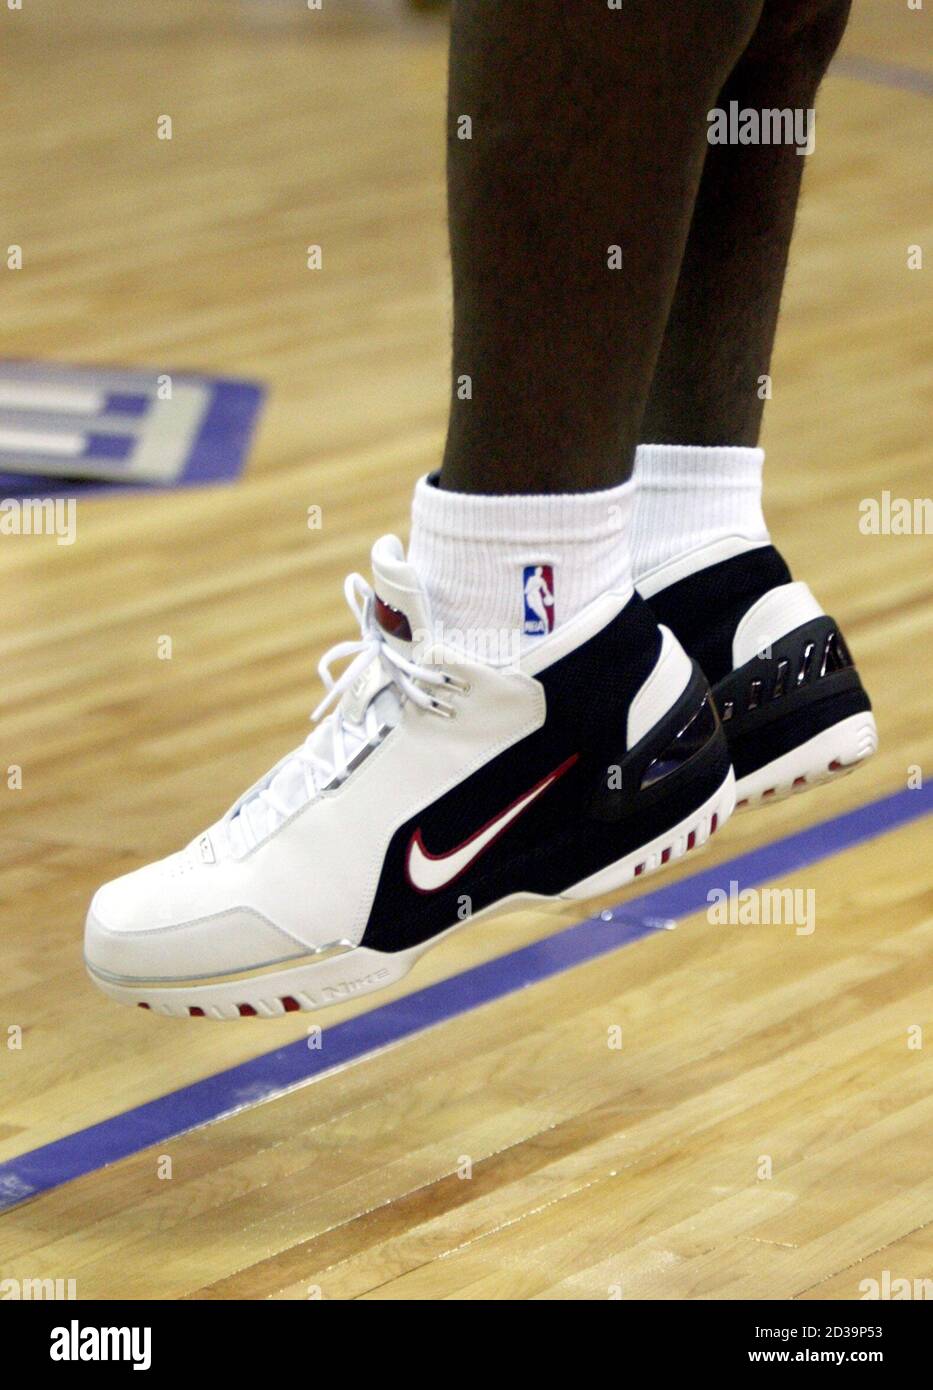 Cleveland Cavaliers' LeBron James warms-up in his new basketball shoes  before making his NBA debut against he Sacramento Kings in Sacramento,  California October 29, 2003. The 18-year-old 6-foot-8 James, first pick in